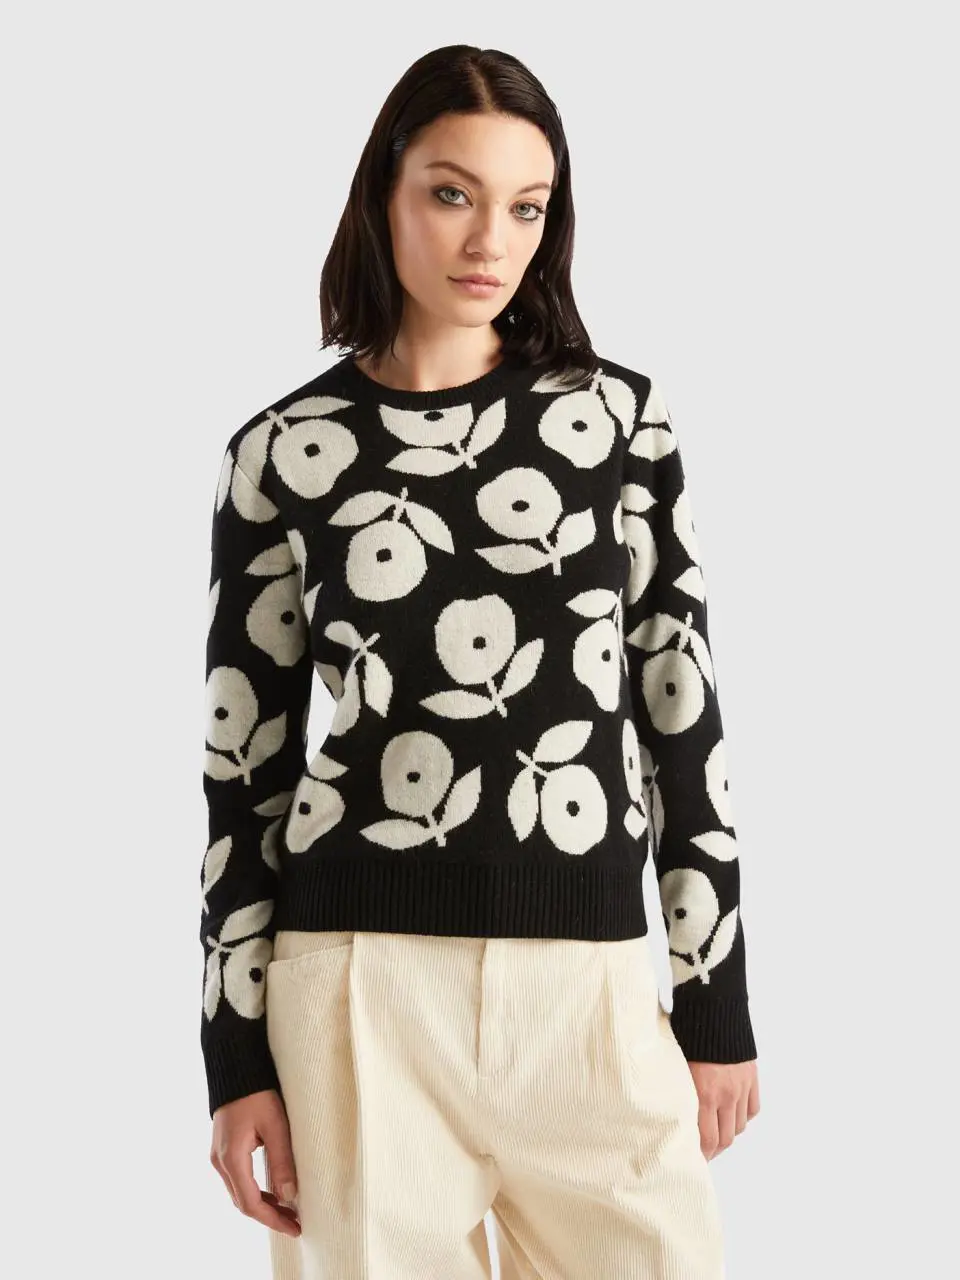 Benetton sweater with floral inlays. 1